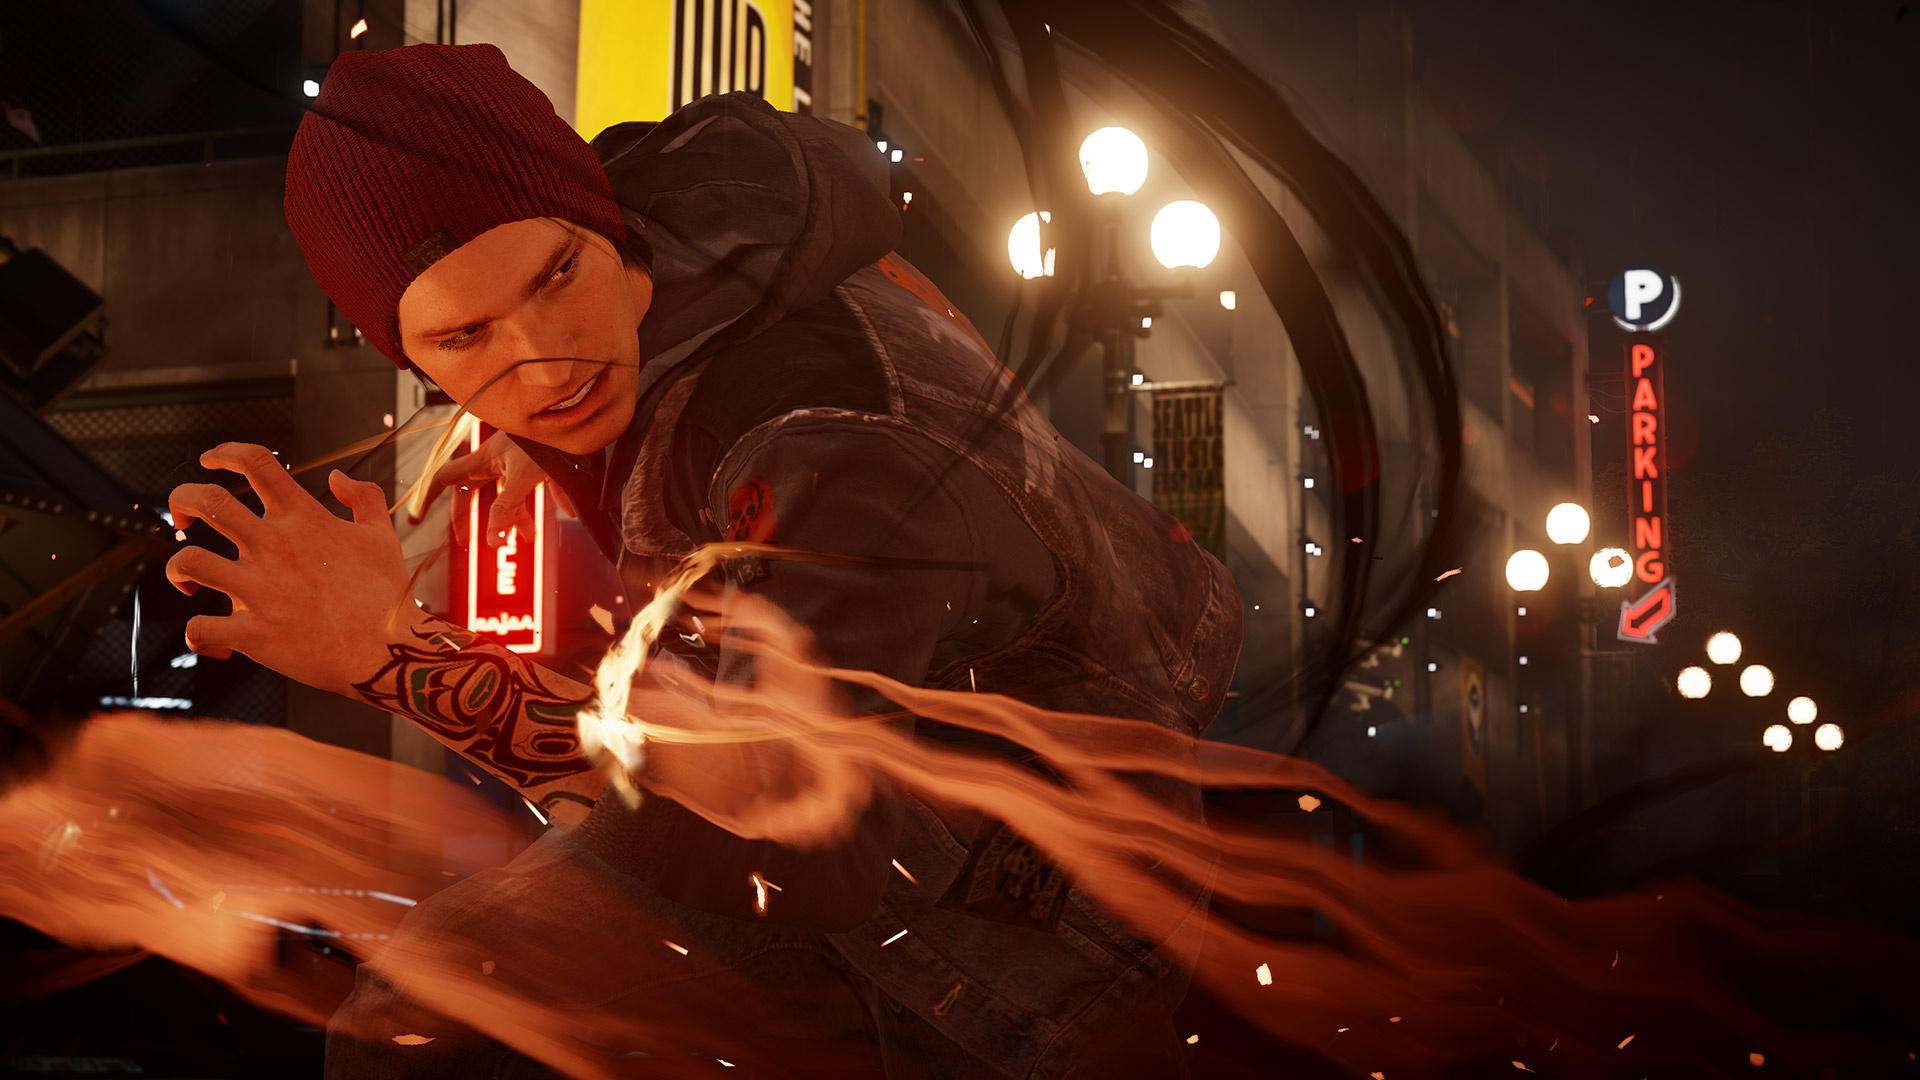 inFAMOUS: Second Son, Online discounts, Exclusive offers, Gaming sales, 1920x1080 Full HD Desktop